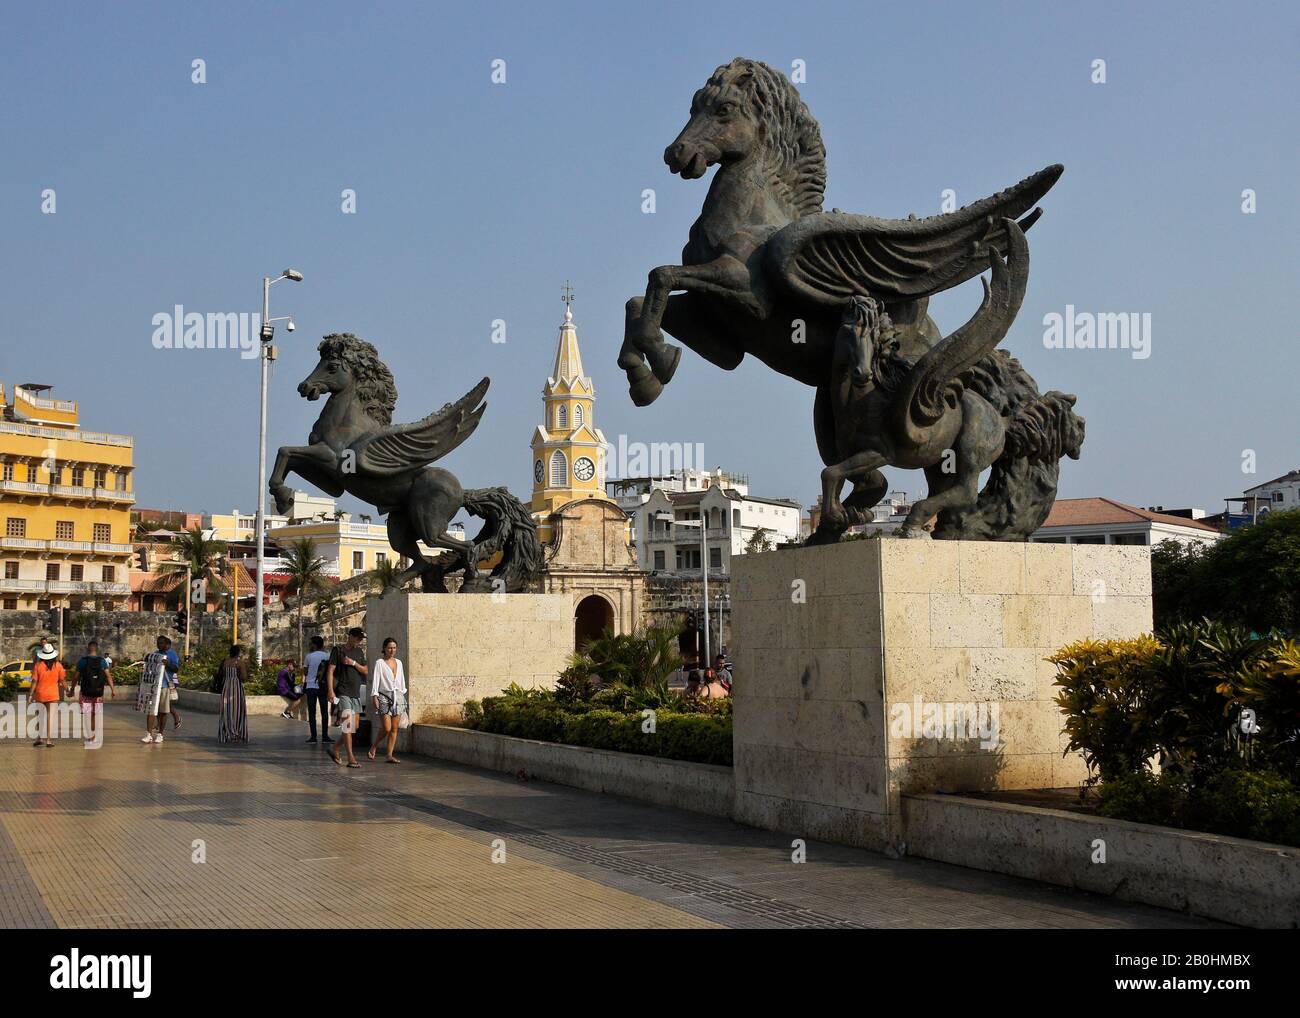 Pegasus sculptures on Paseo de los Martires near the Clock Tower (Torre del Reloj) entrance to the old walled city, Cartagena, Colombia Stock Photo